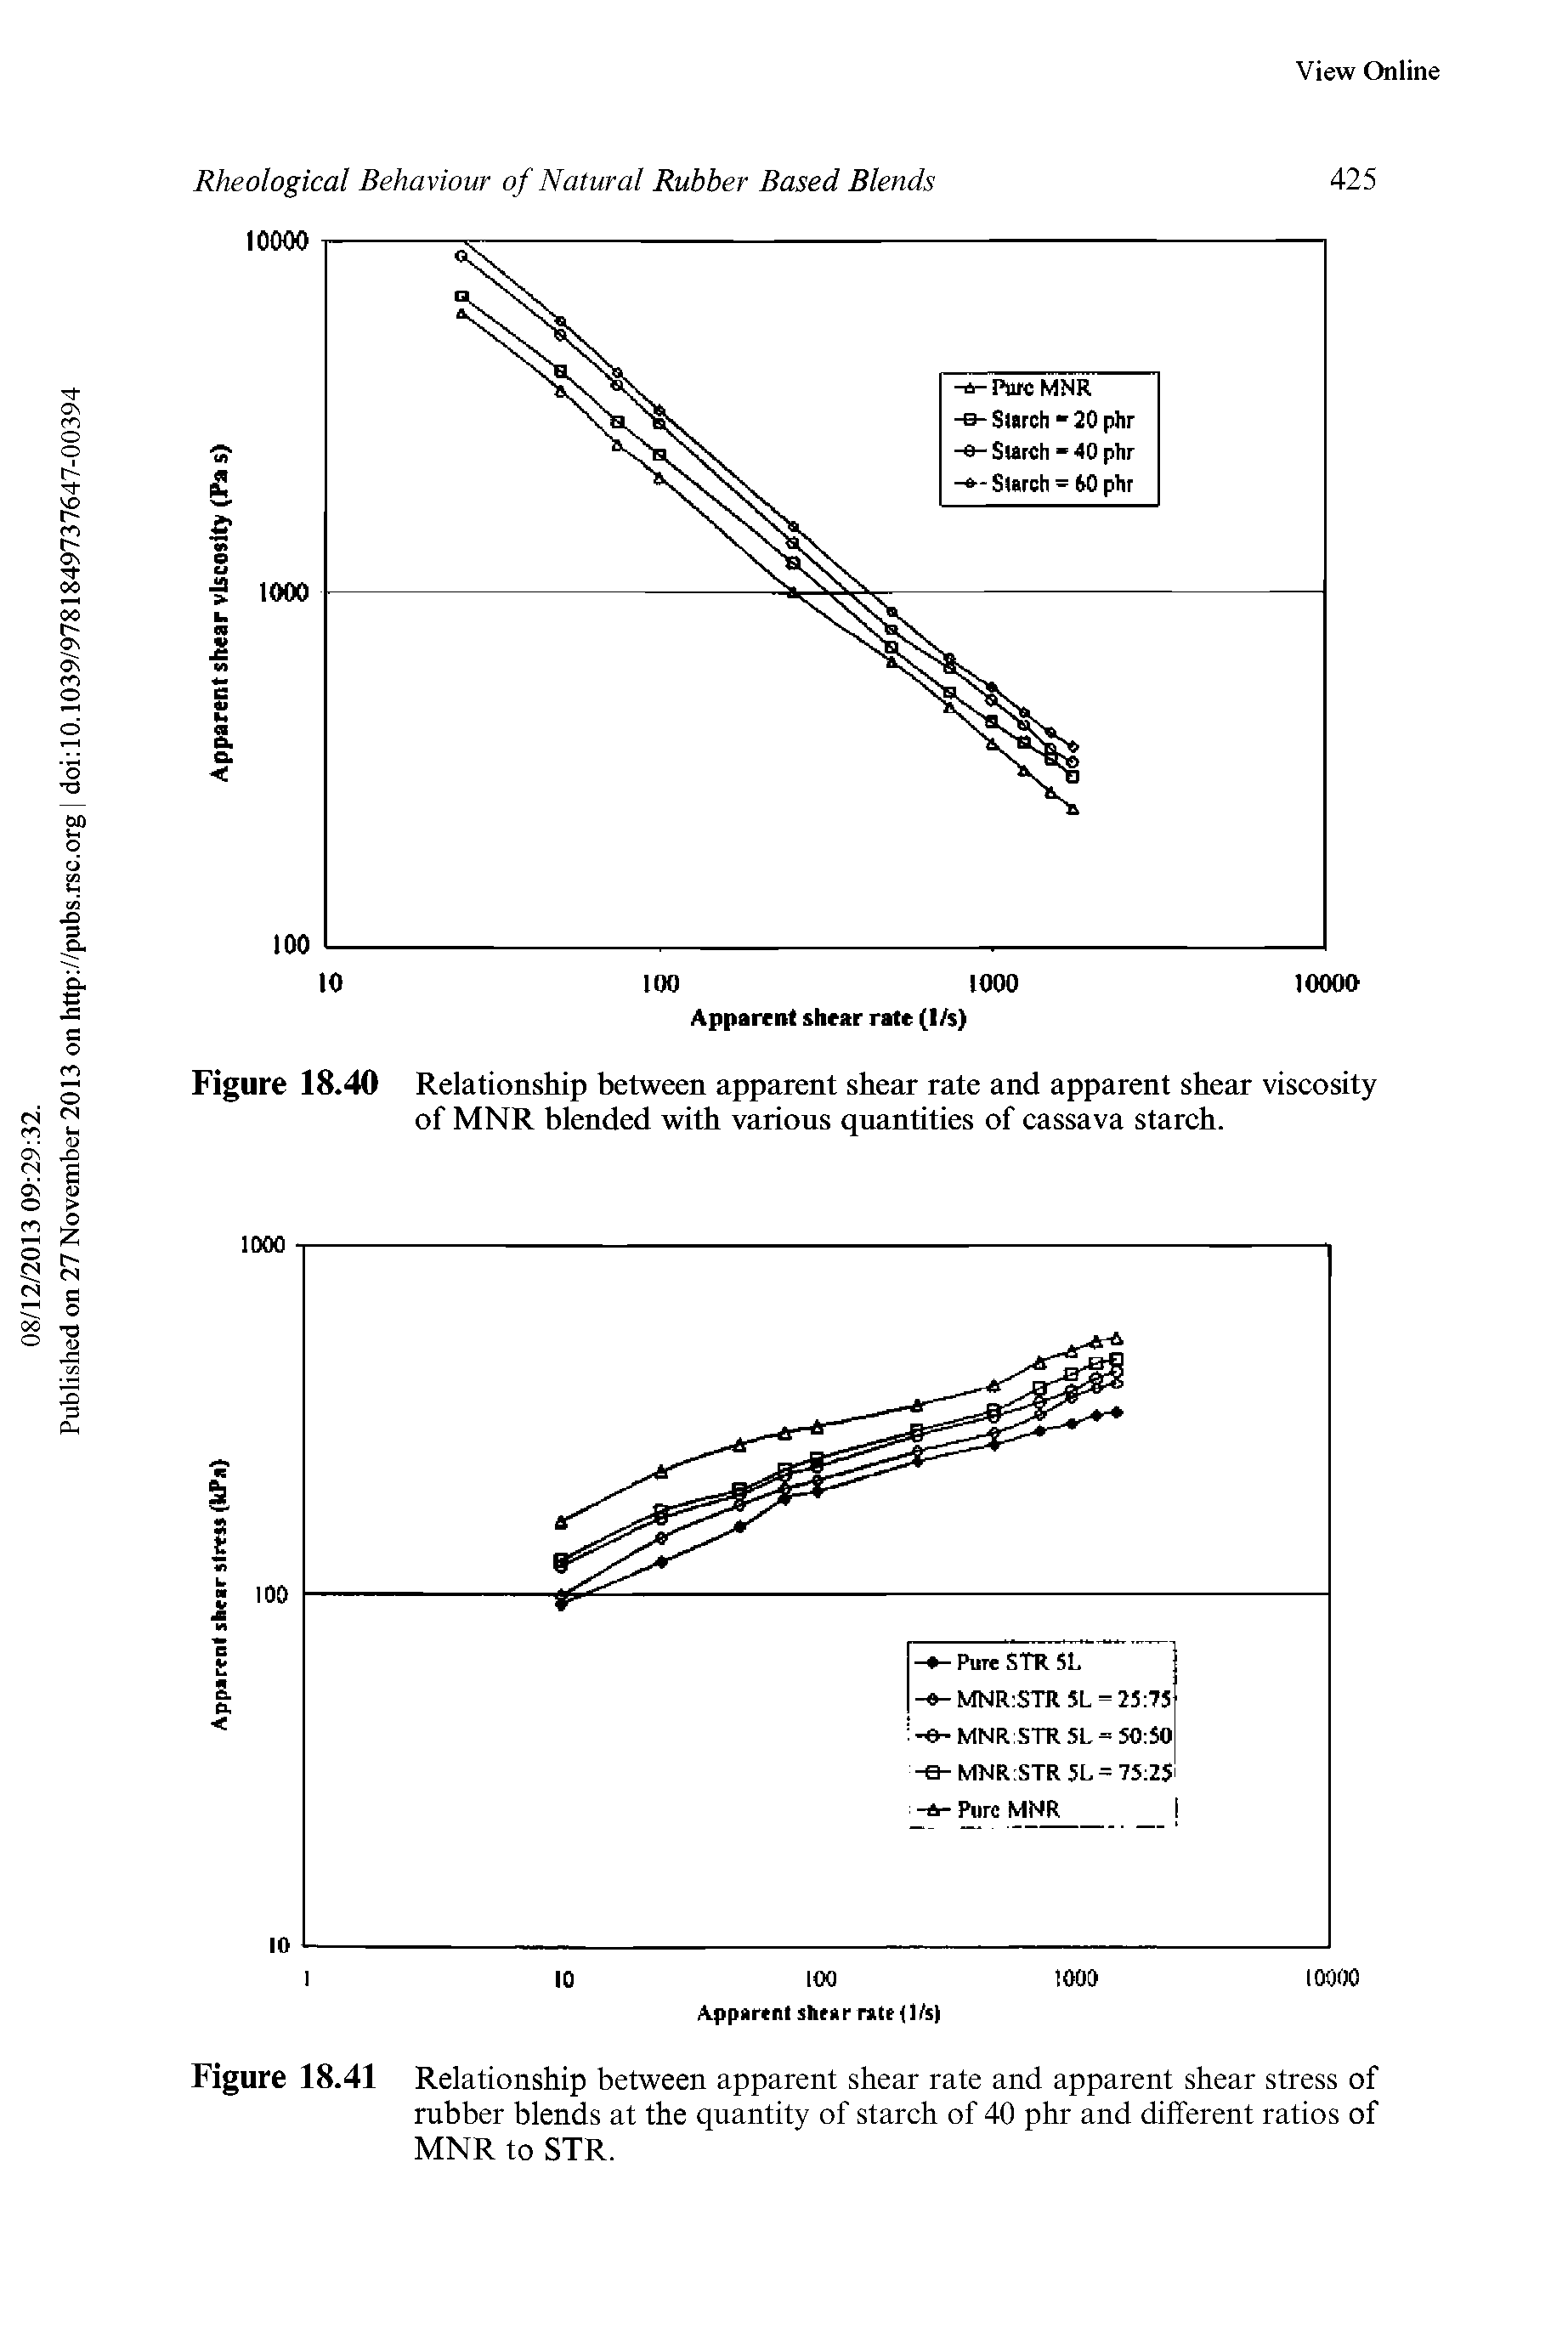 Figure 18.40 Relationship between apparent shear rate and apparent shear viscosity of MNR blended with various quantities of cassava starch.